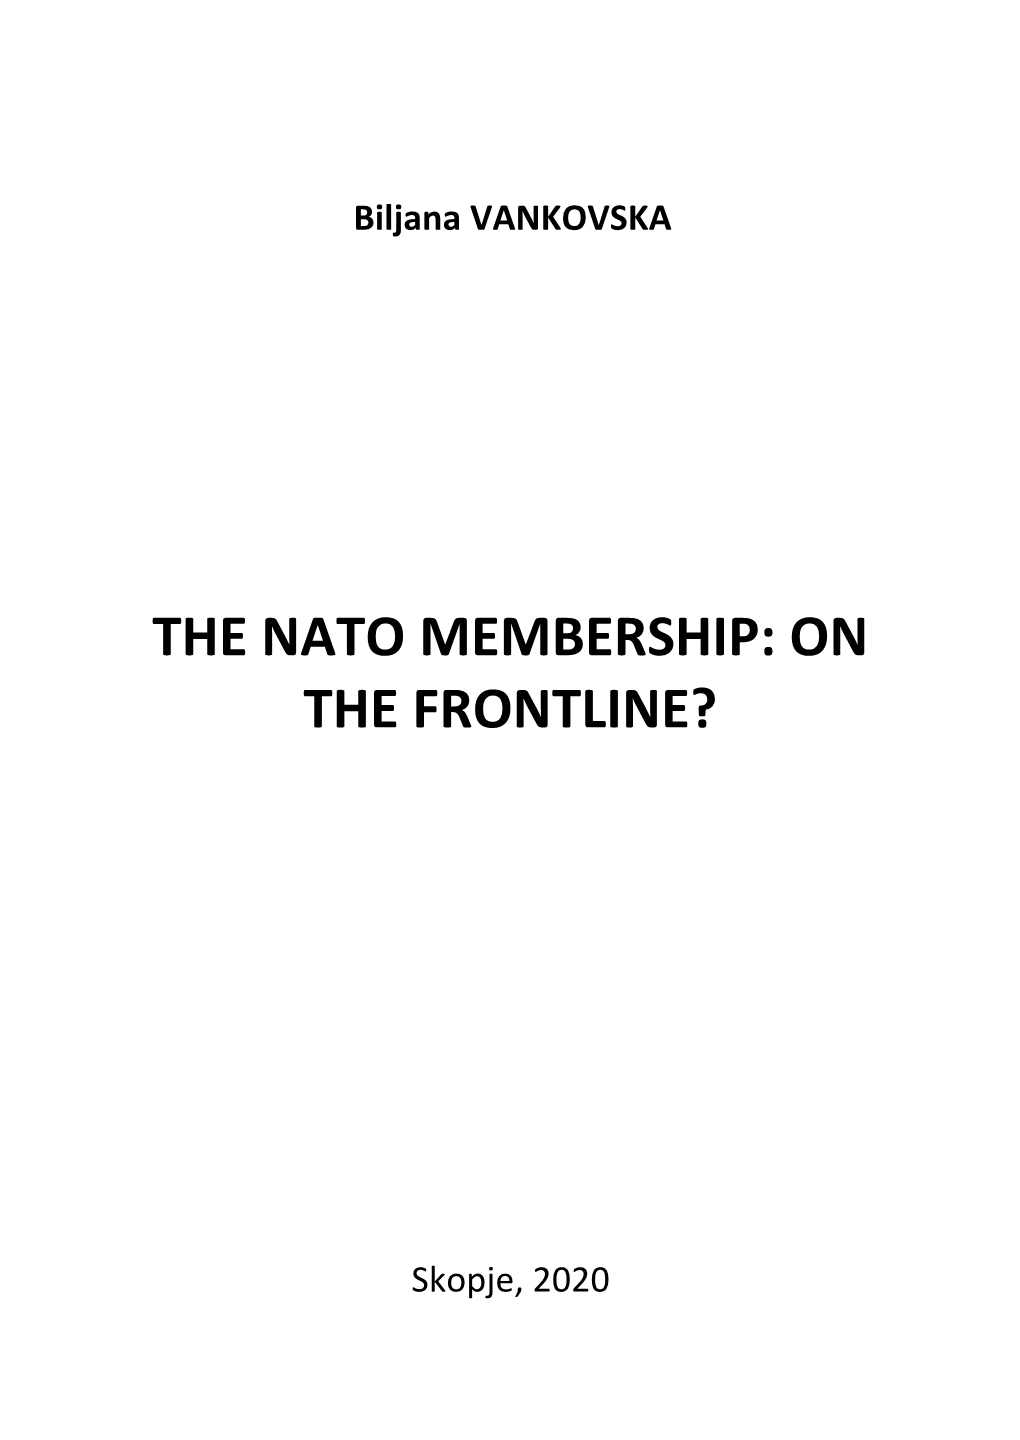 Final the Membership to Nato, on The